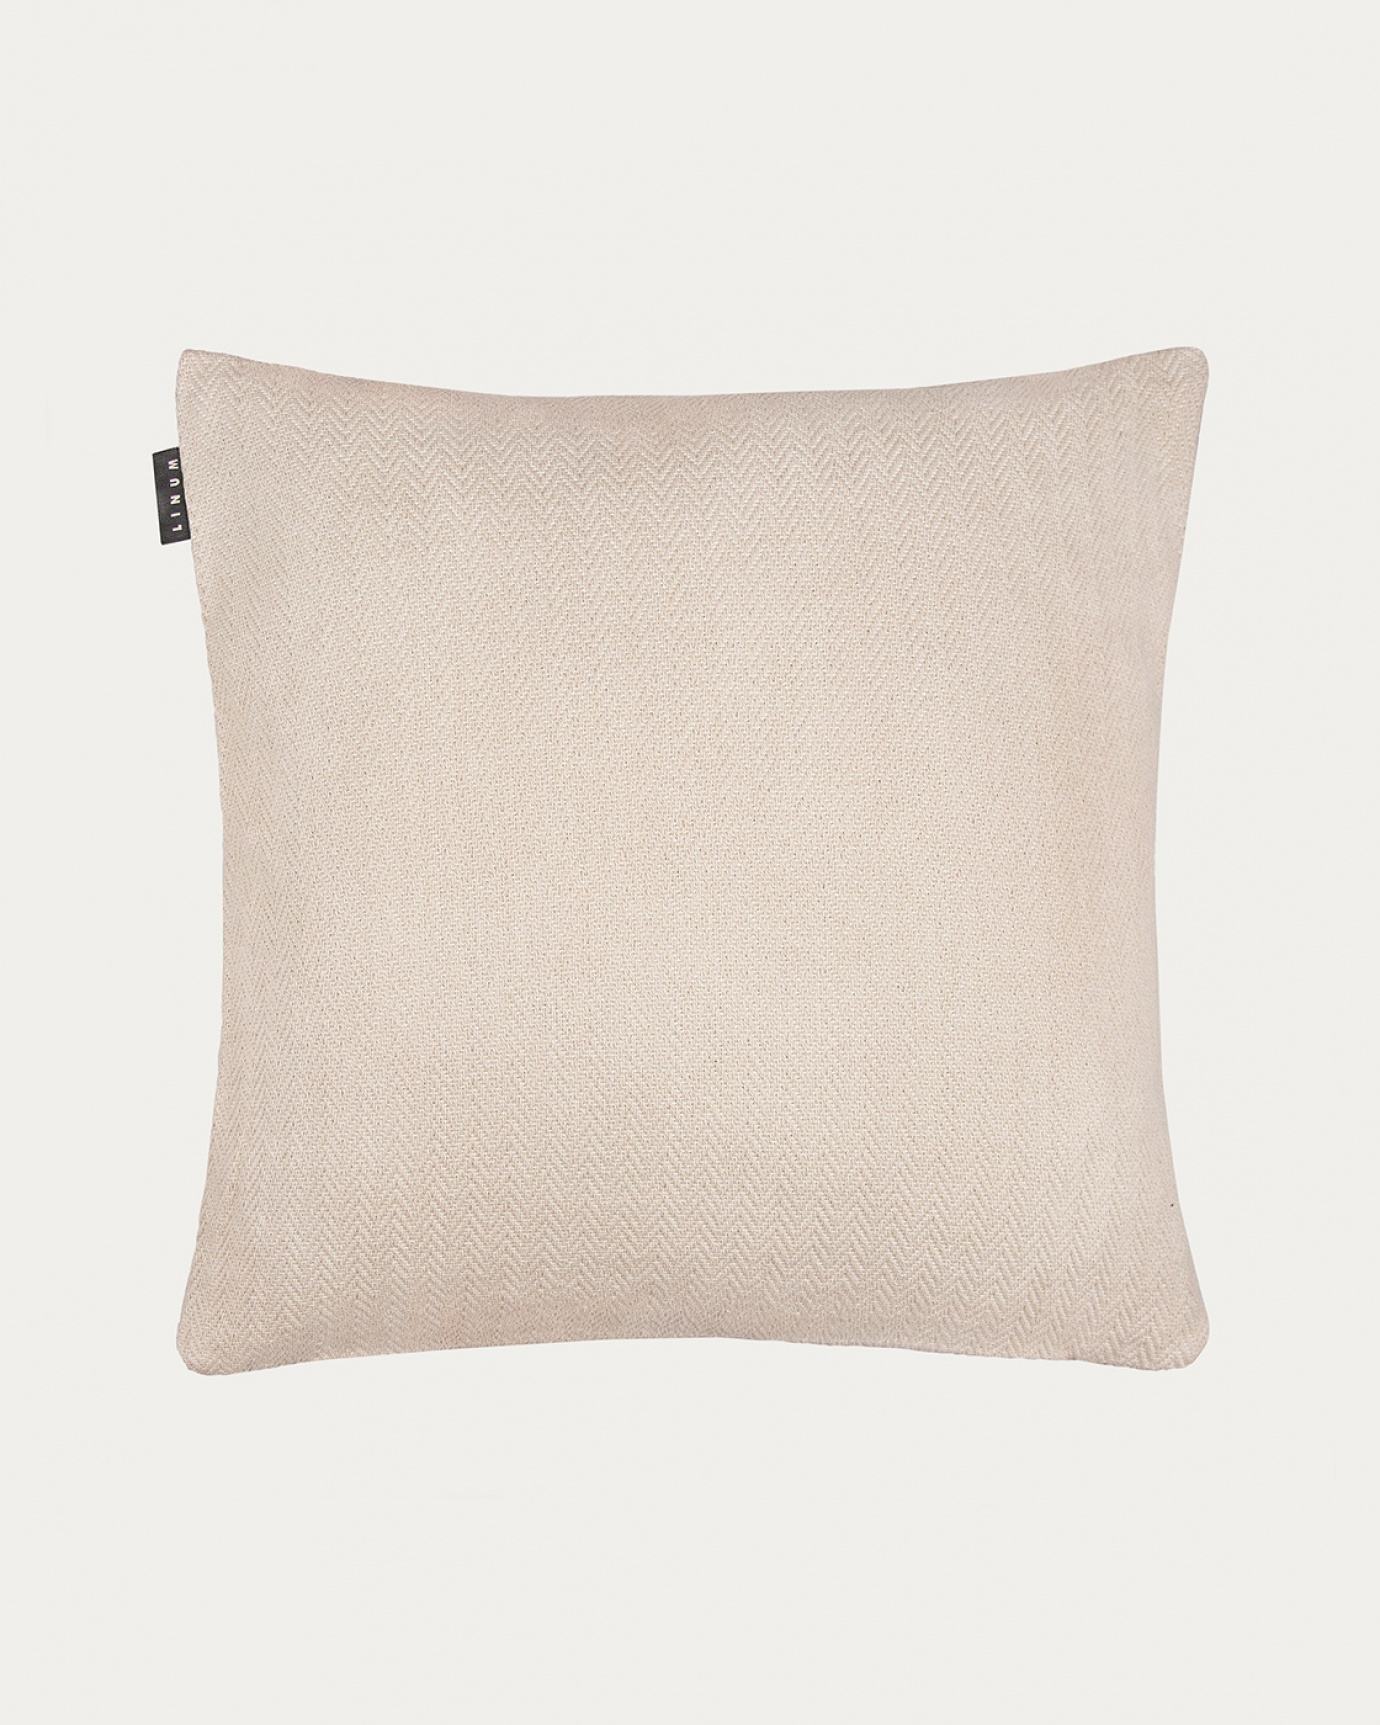 Product image pale light grey SHEPARD cushion cover made of soft cotton with a discreet herringbone pattern from LINUM DESIGN. Size 50x50 cm.